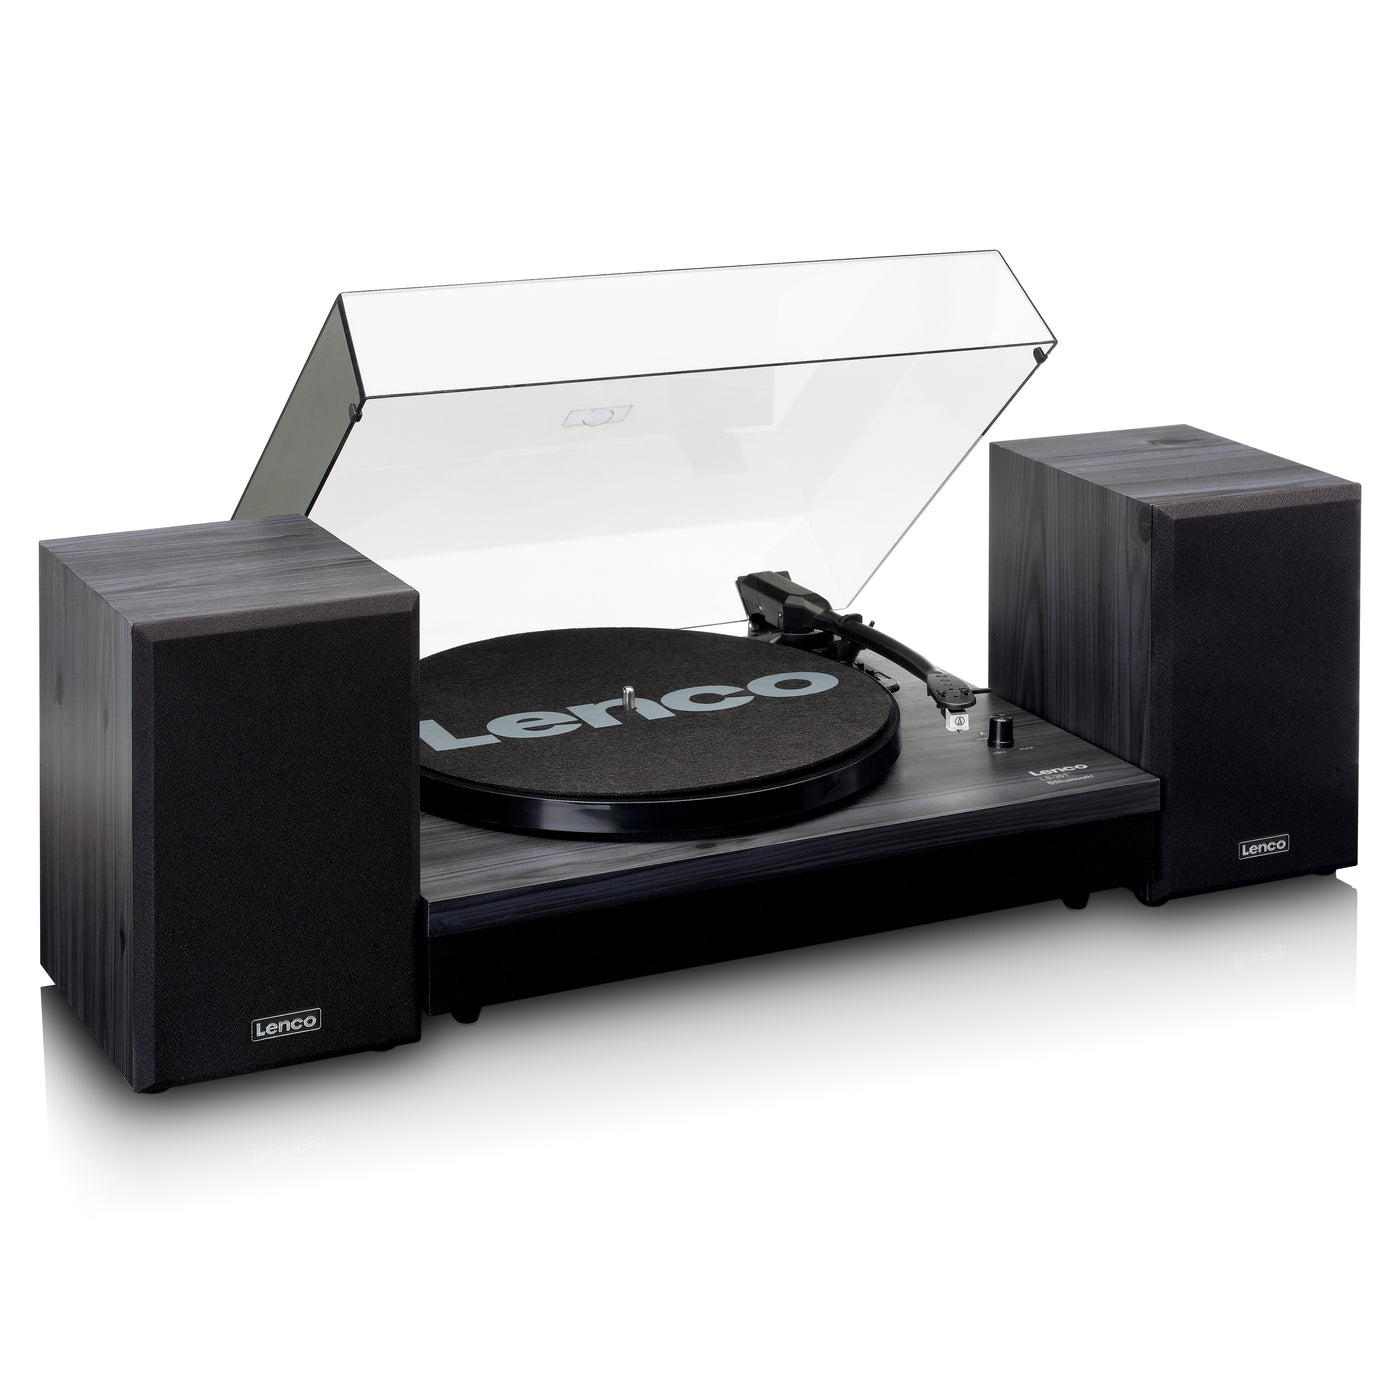 LENCO LS-301BK - separate – Lenco-Catalog speakers, with Turntable and two Bluetooth®